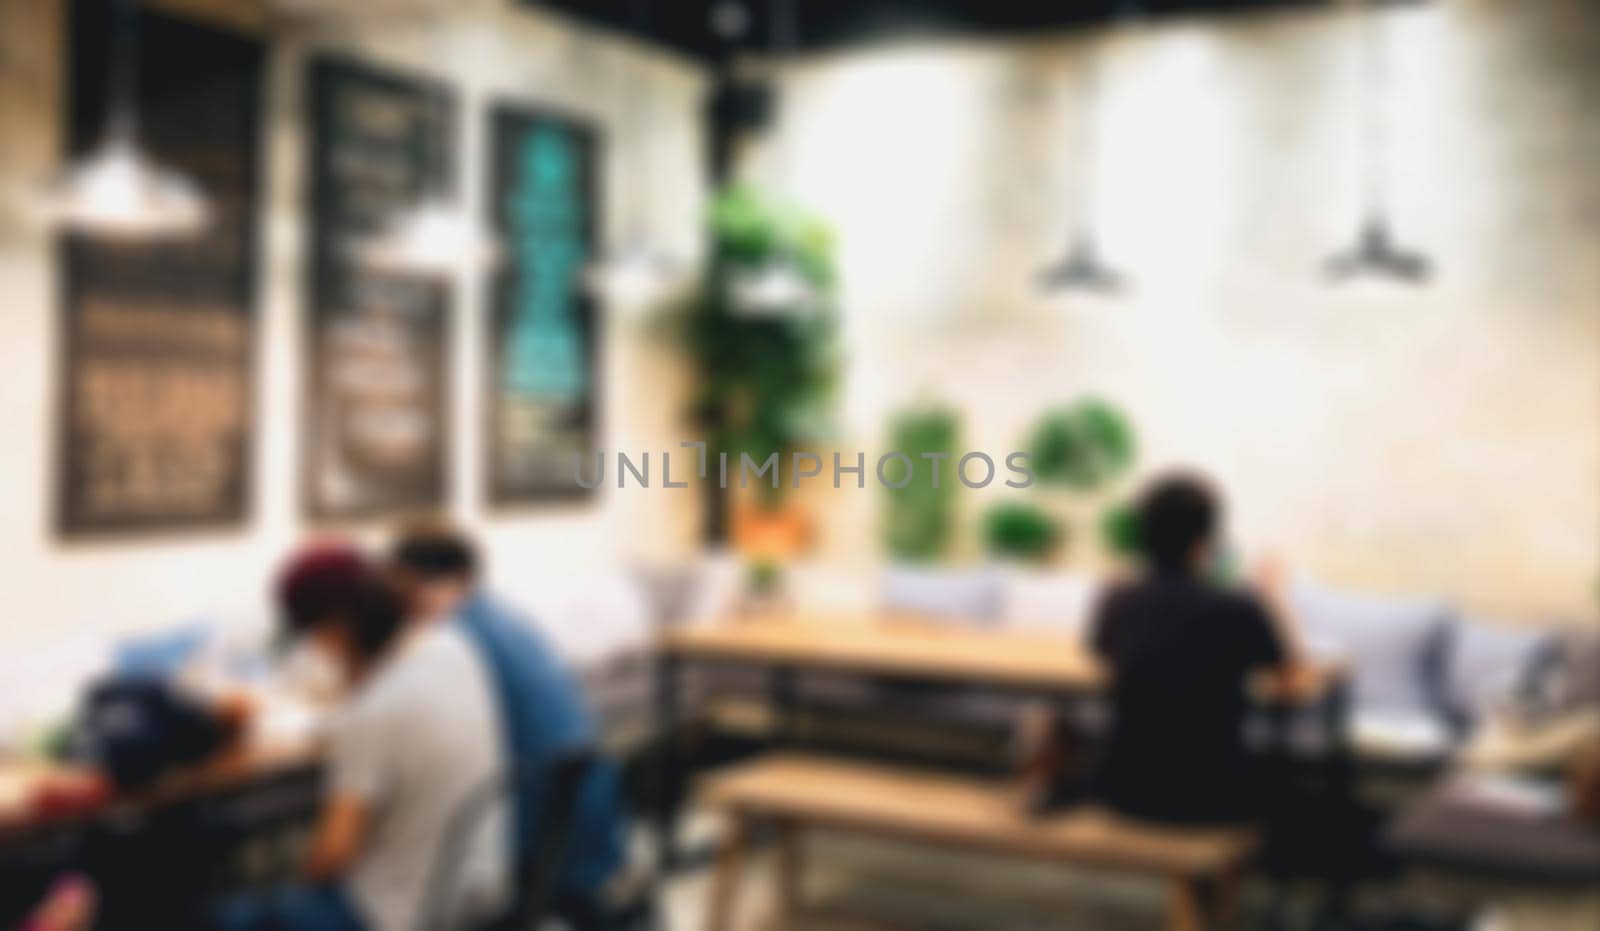 Blurred background made with Vintage Tones,Coffee shop blur background.